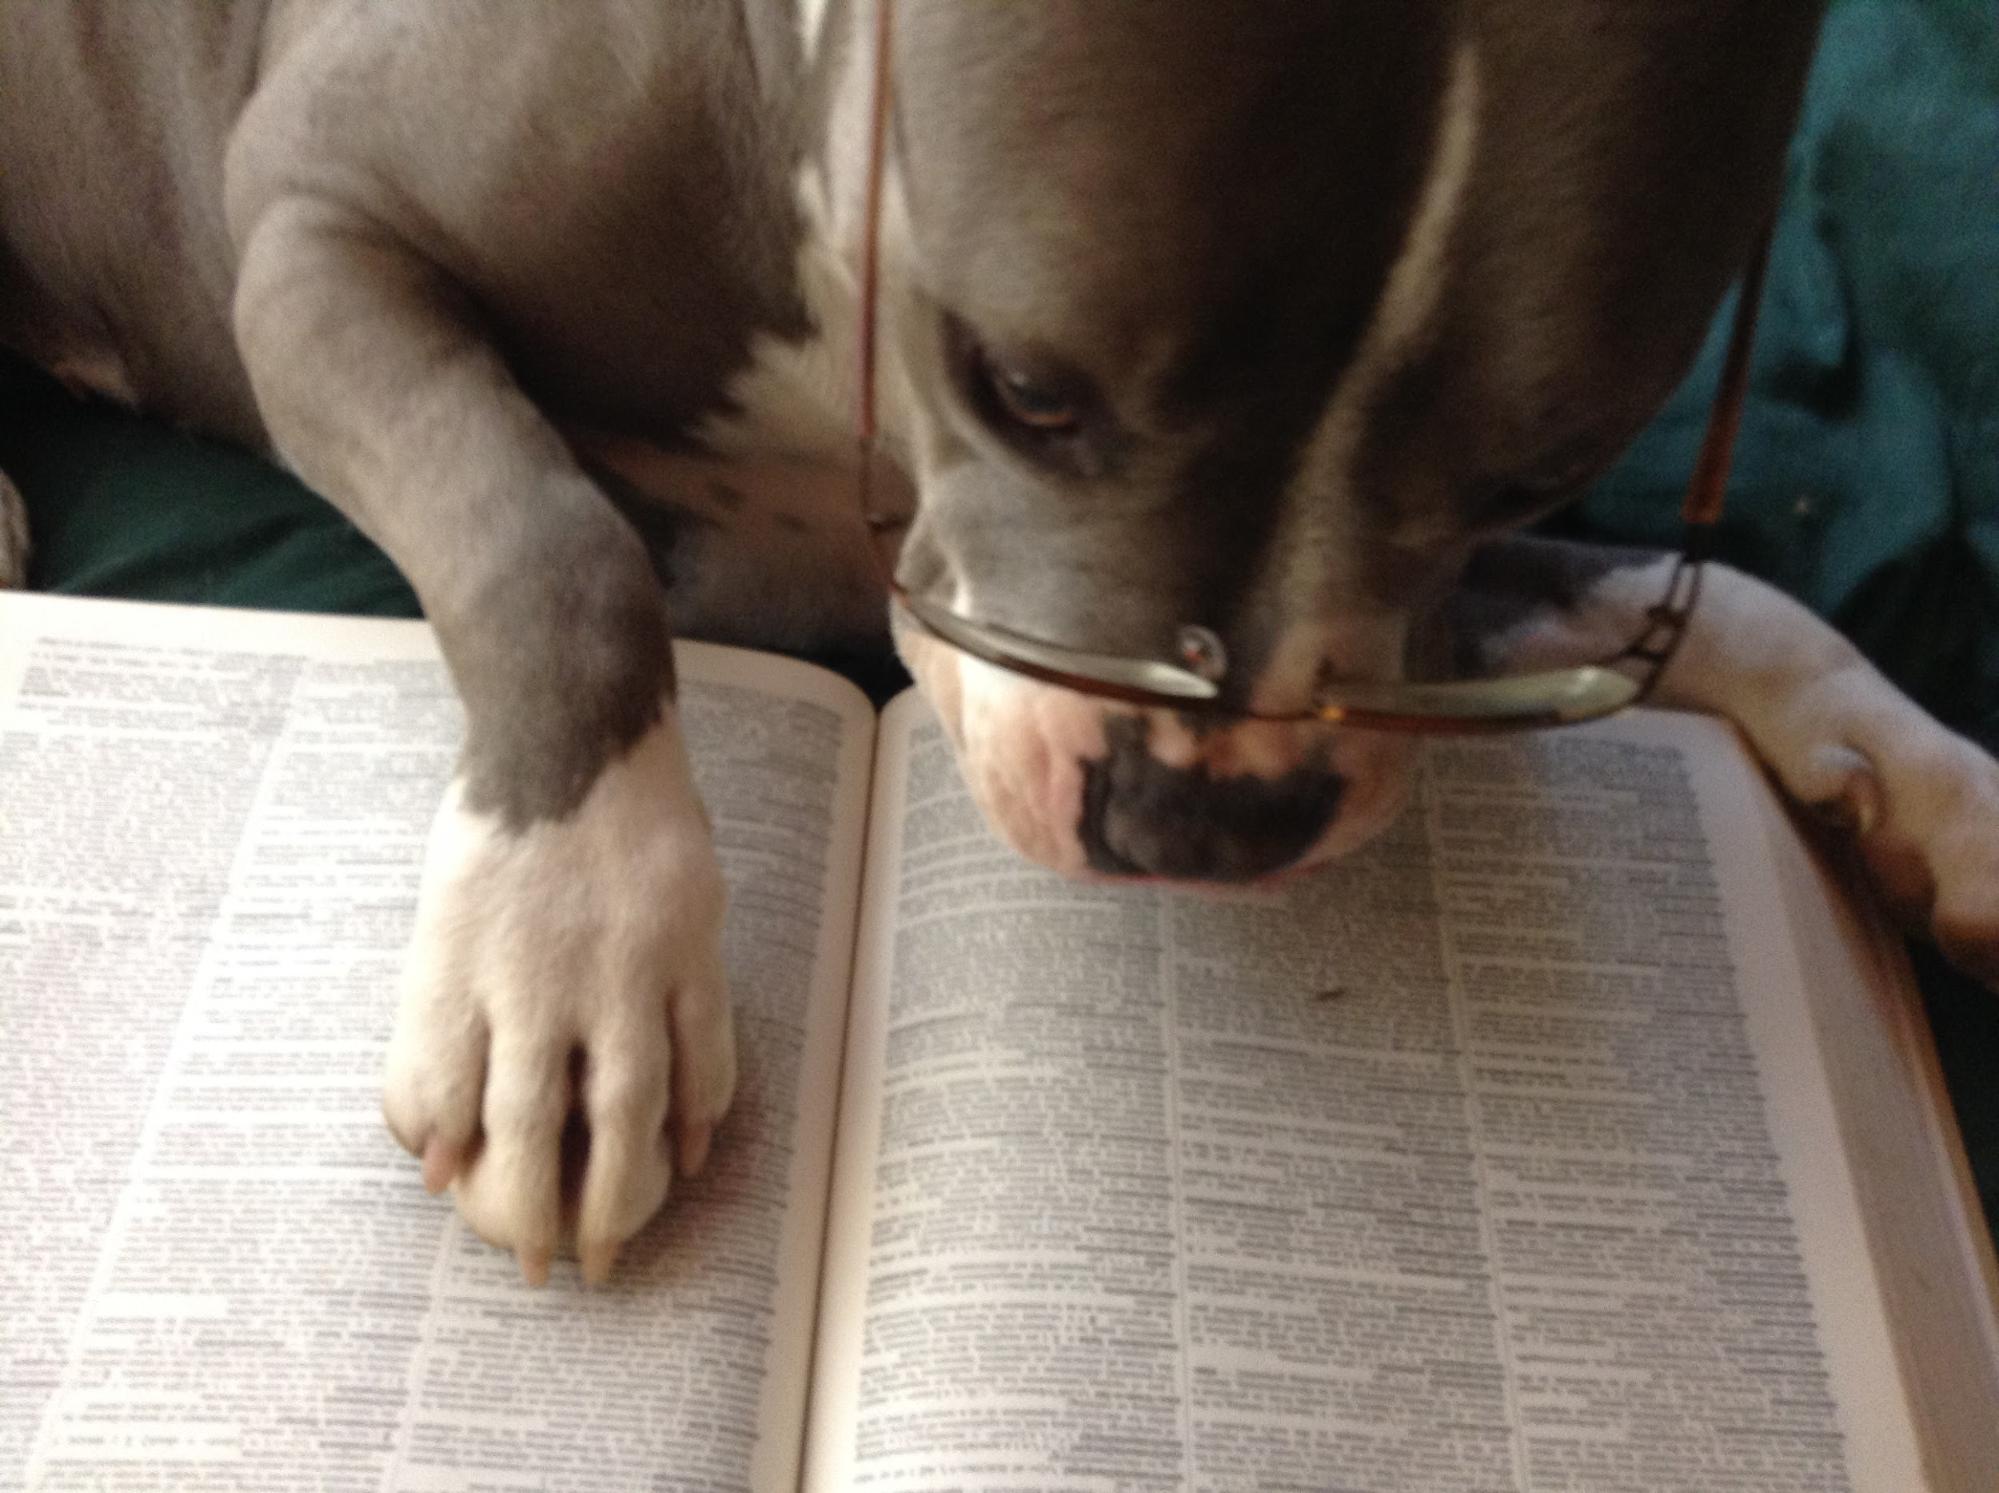 A dog wearing glasses and intently reading a book.